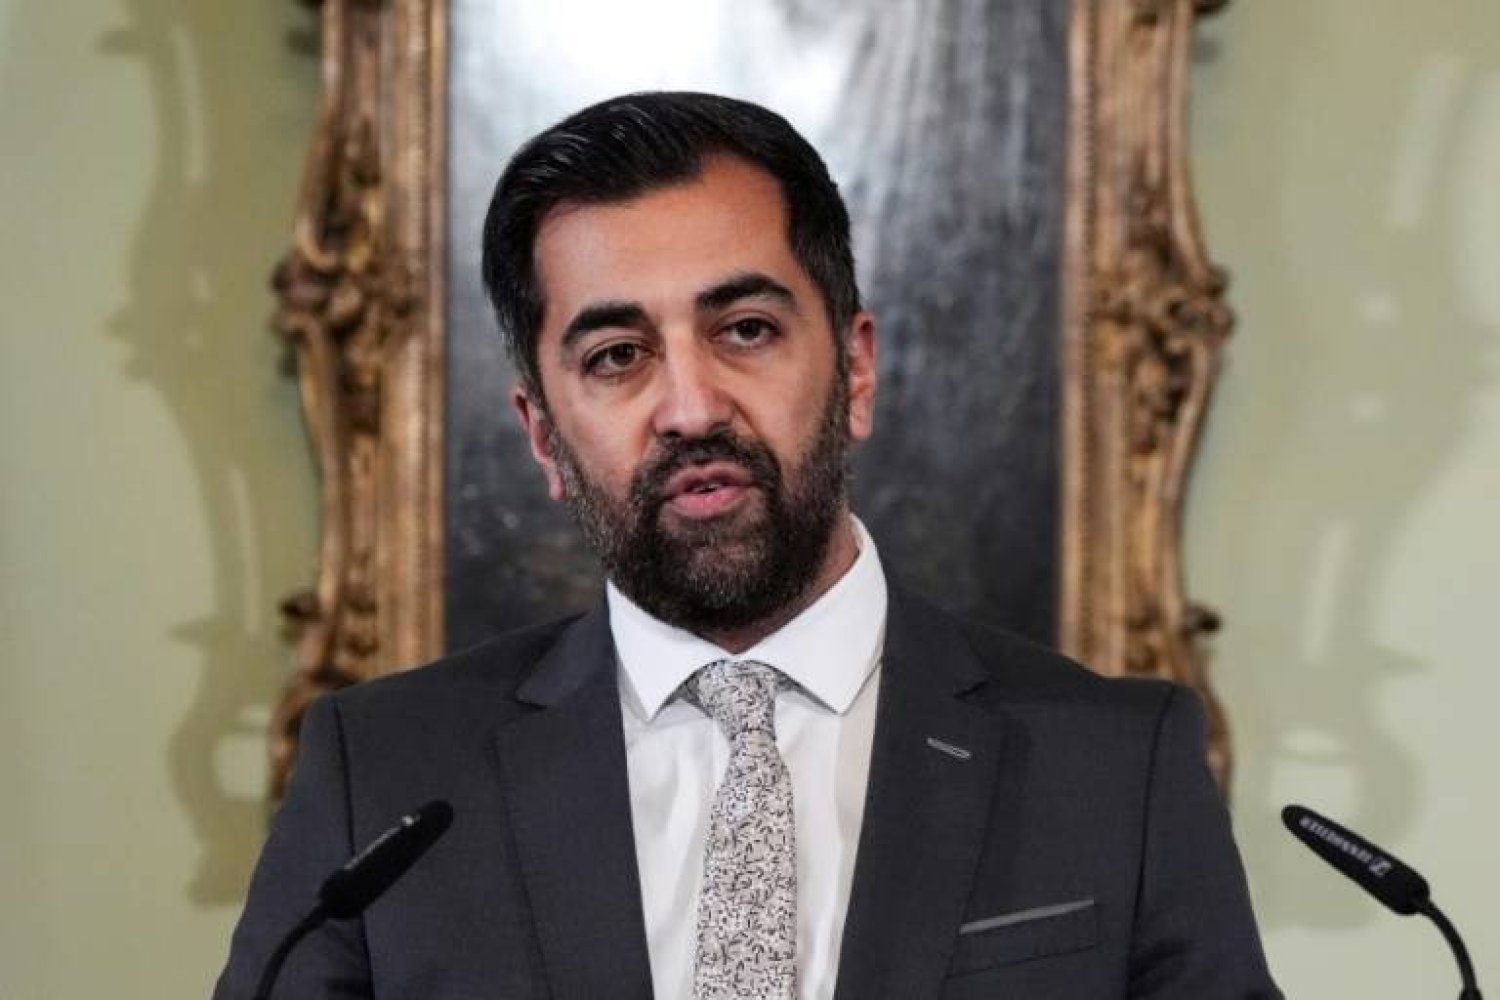 Humza Yousaf announced his resignation in an appearance at Bute House in Edinburgh - AFP